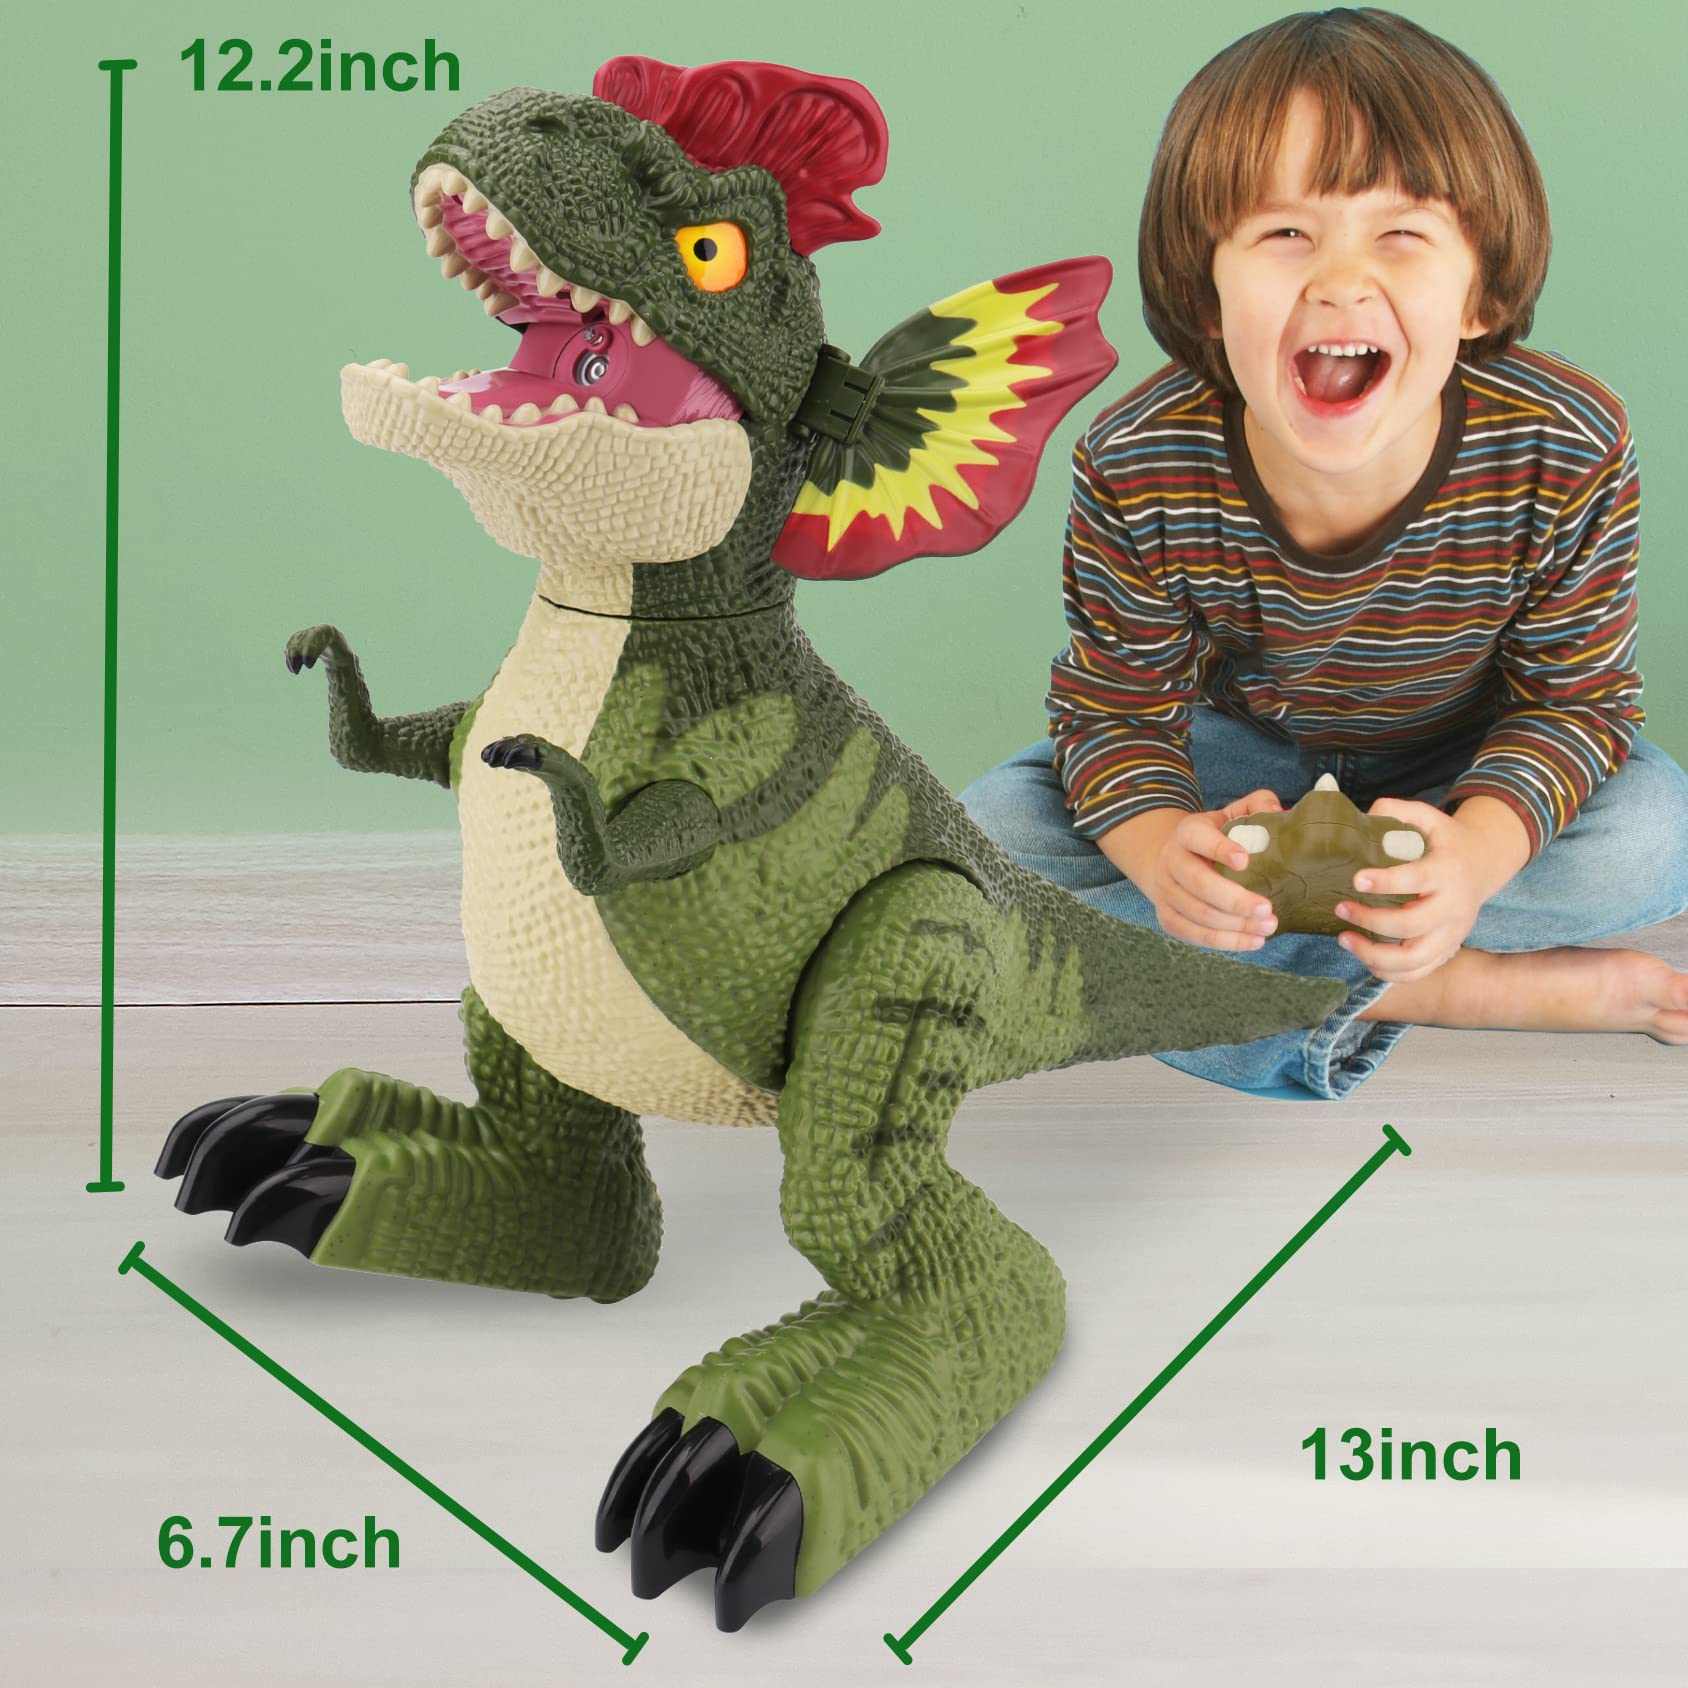 IQKidz RC Dinosaur Kids Toys Robot-Remote Control Electronic Realistic Walking Dino Gifts for Boy Girl Ages 3-5 4-8 and Up, 360° Rotate Interactive Toy with Light Roaring Spray & Touch Sensing